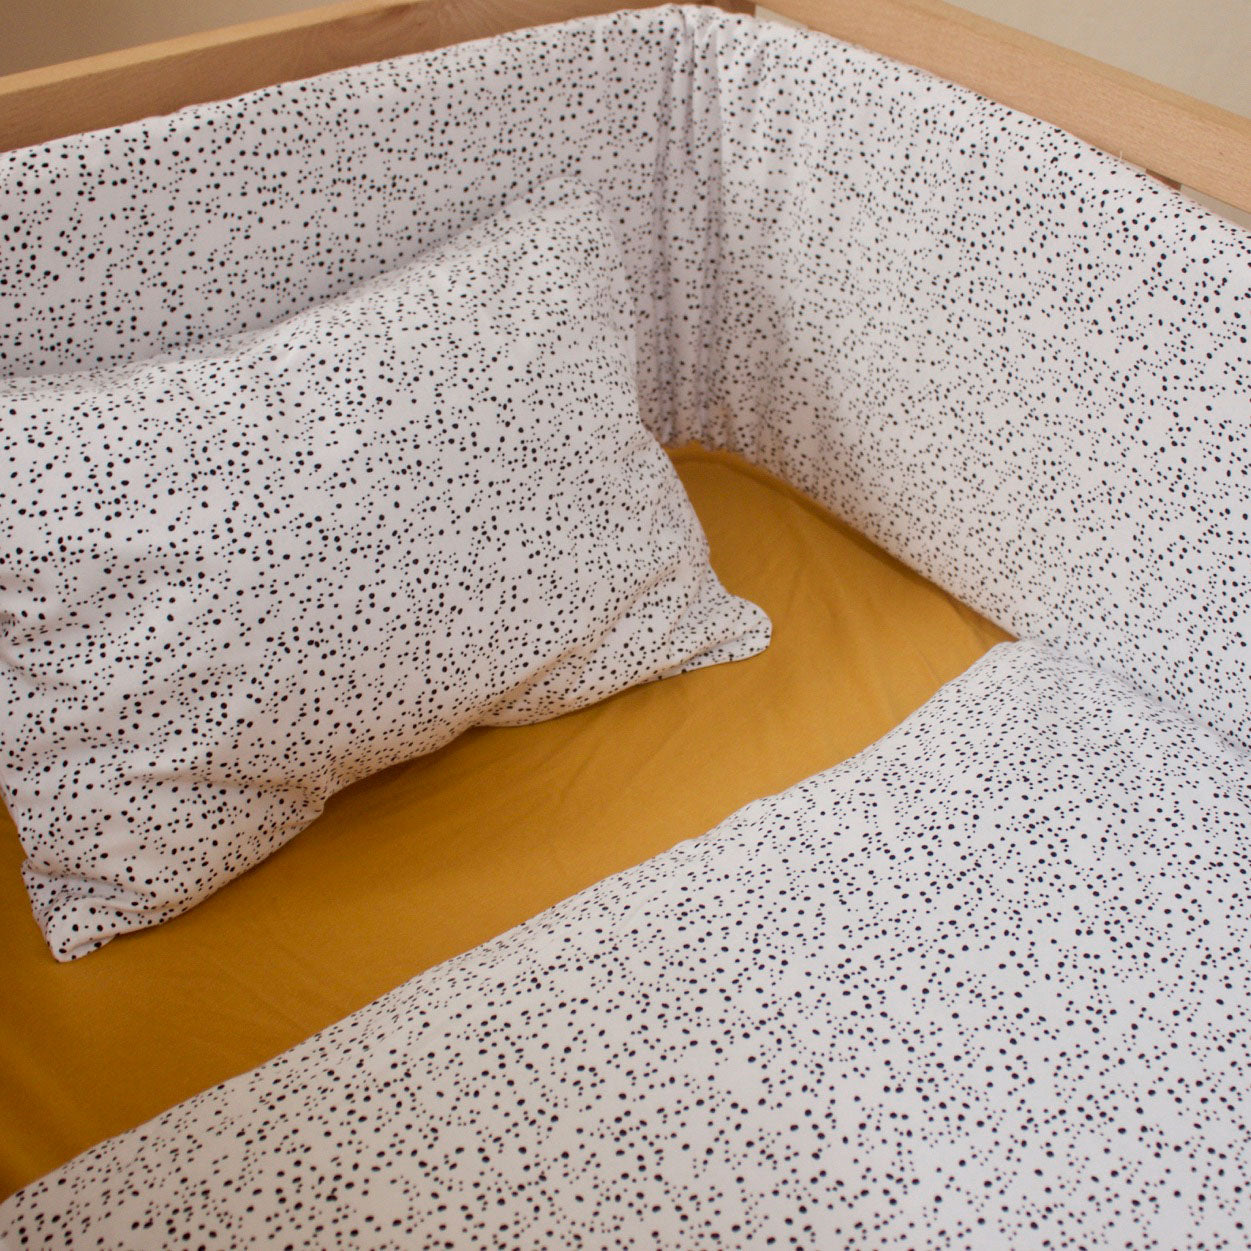 Duvet Cover and Pillowcase - Speckles